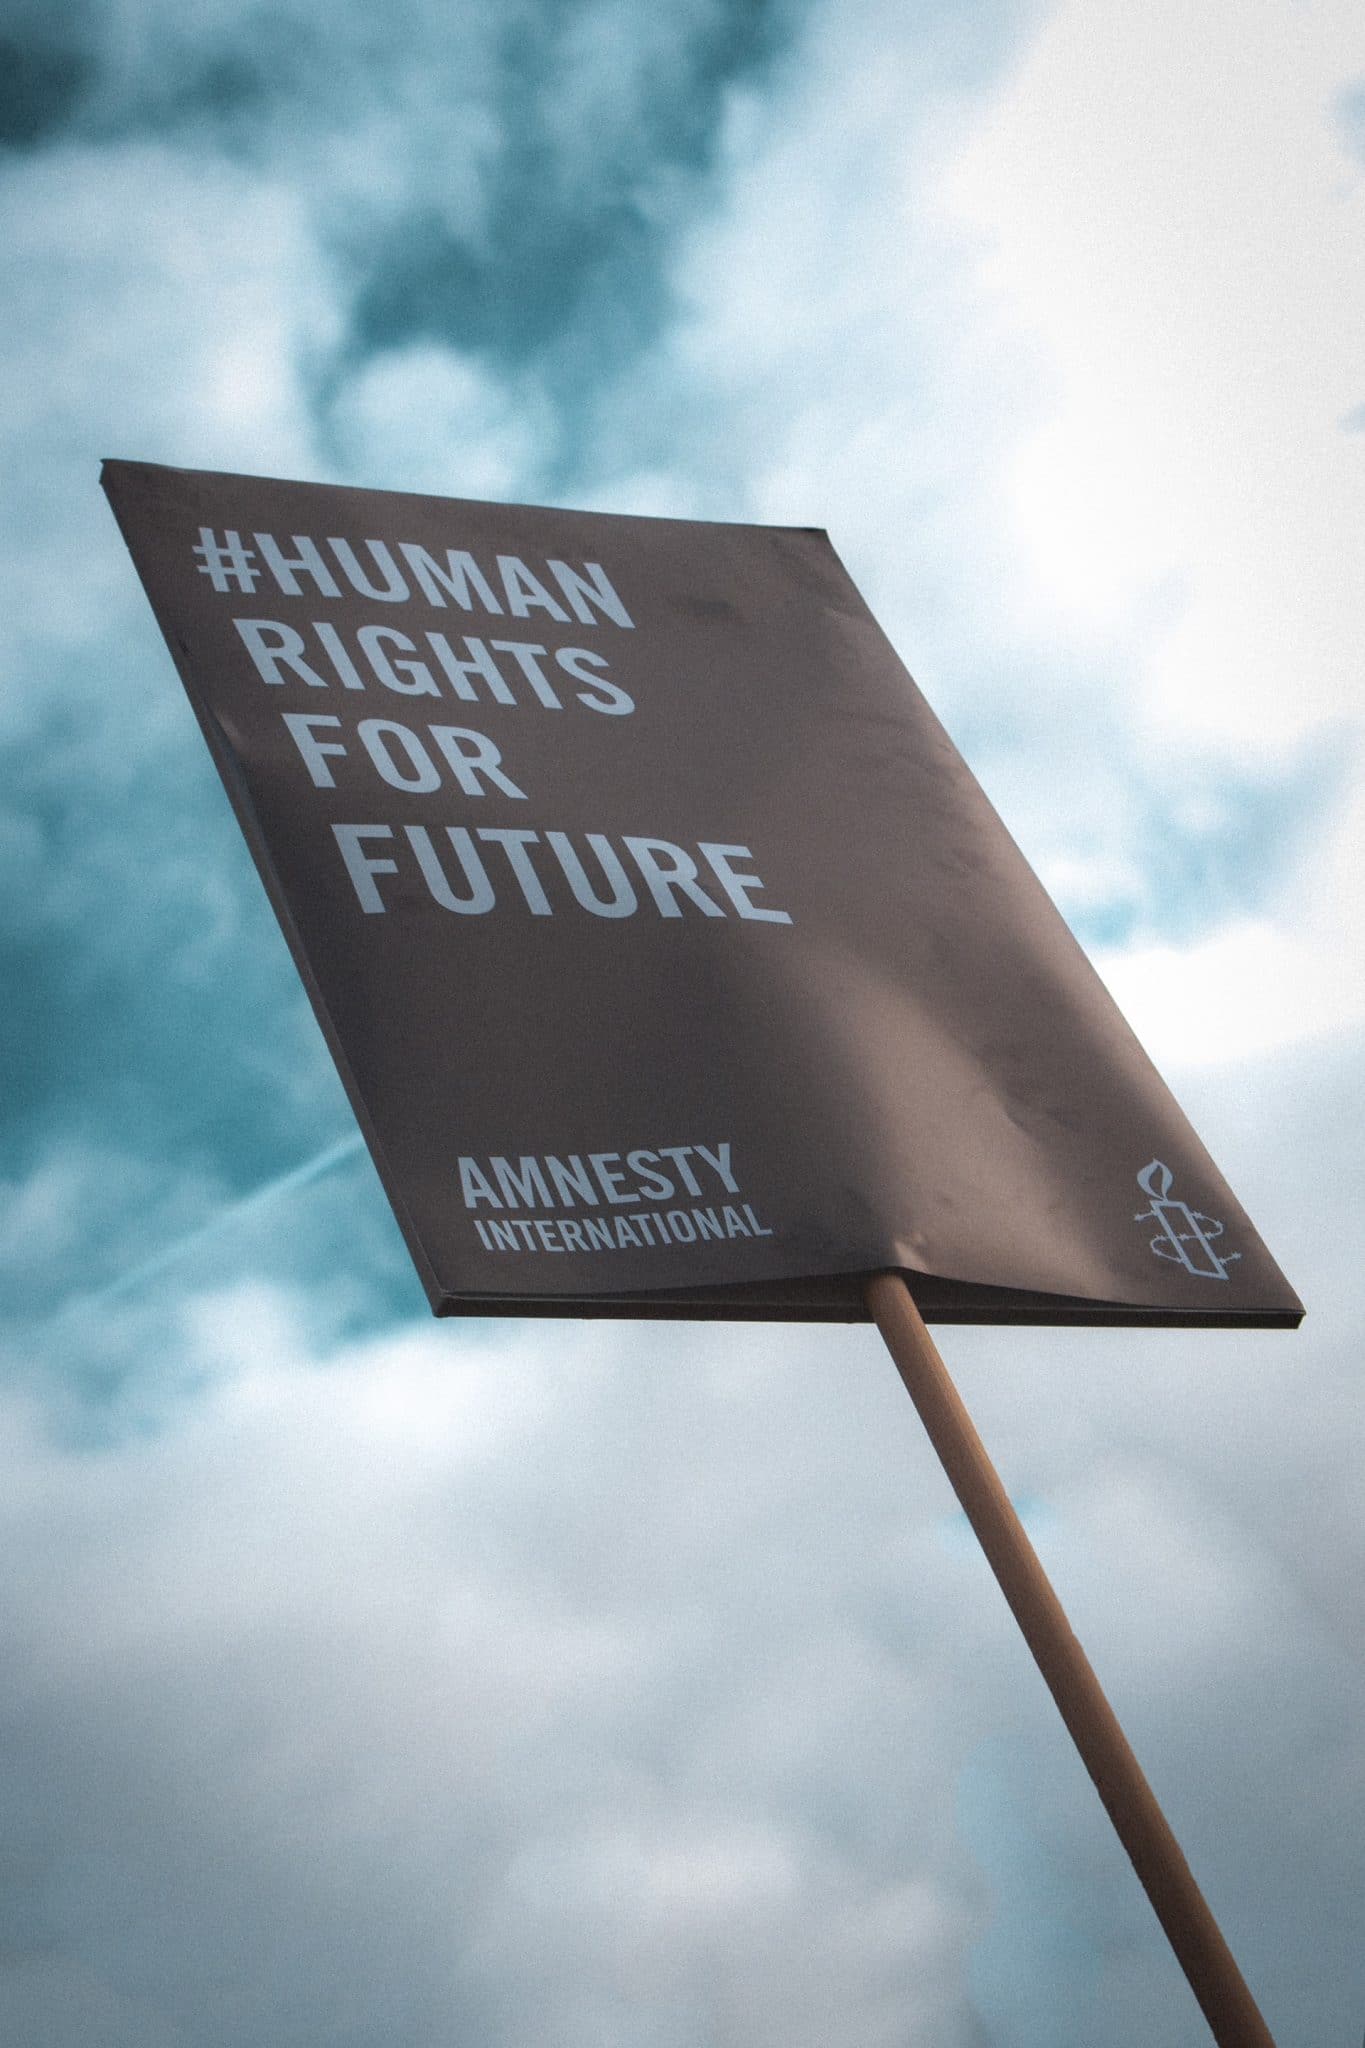 NGO Amnesty International poster against cloudy sky